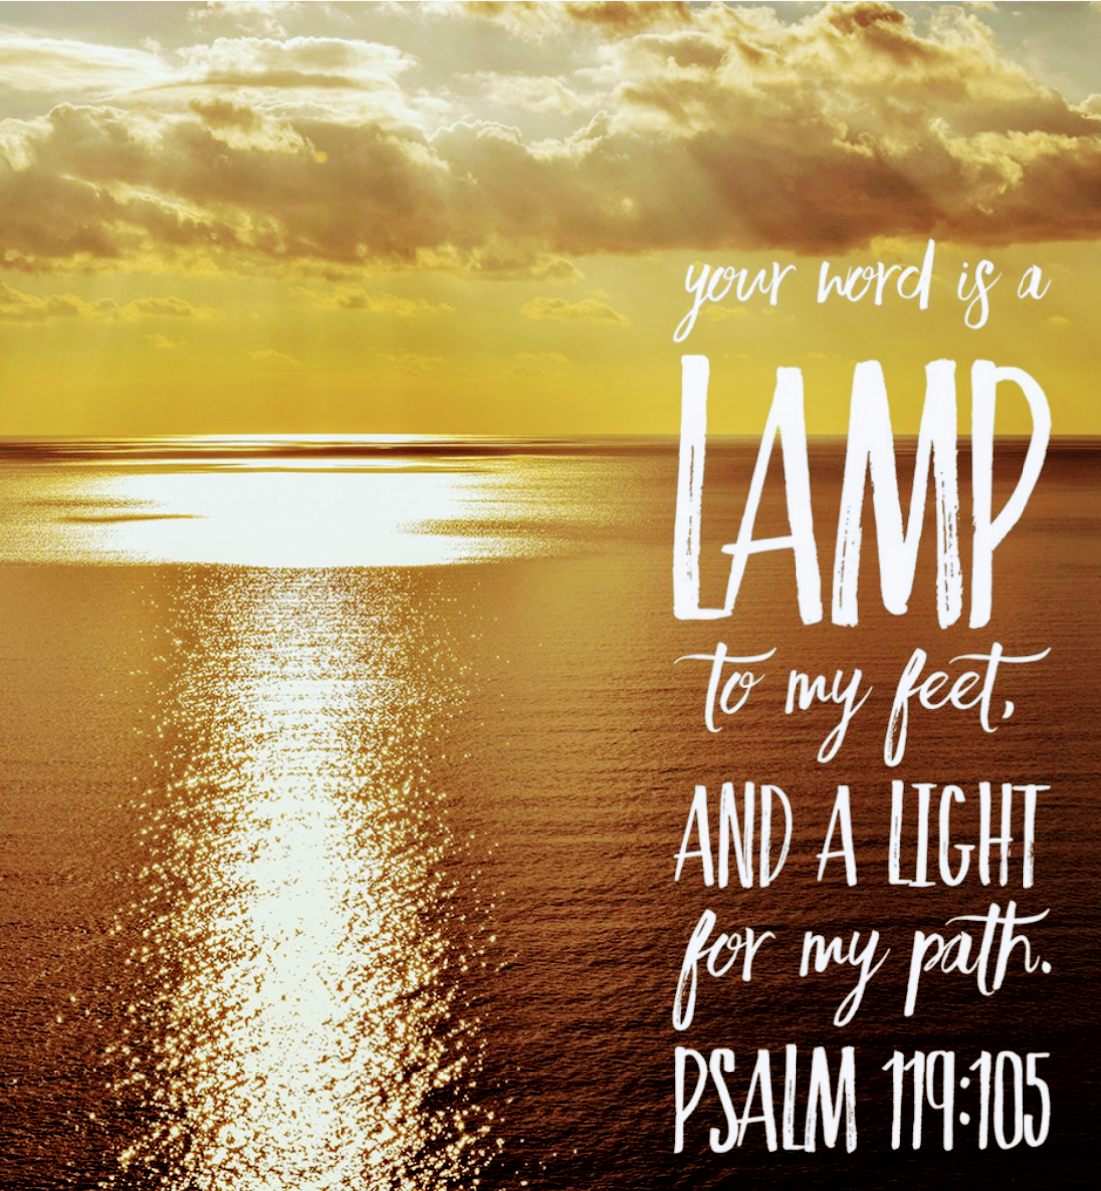 Thy word is a lamp unto my feet, and a light unto my path. - Psalm 119:105  | by Keith McGivern | Medium